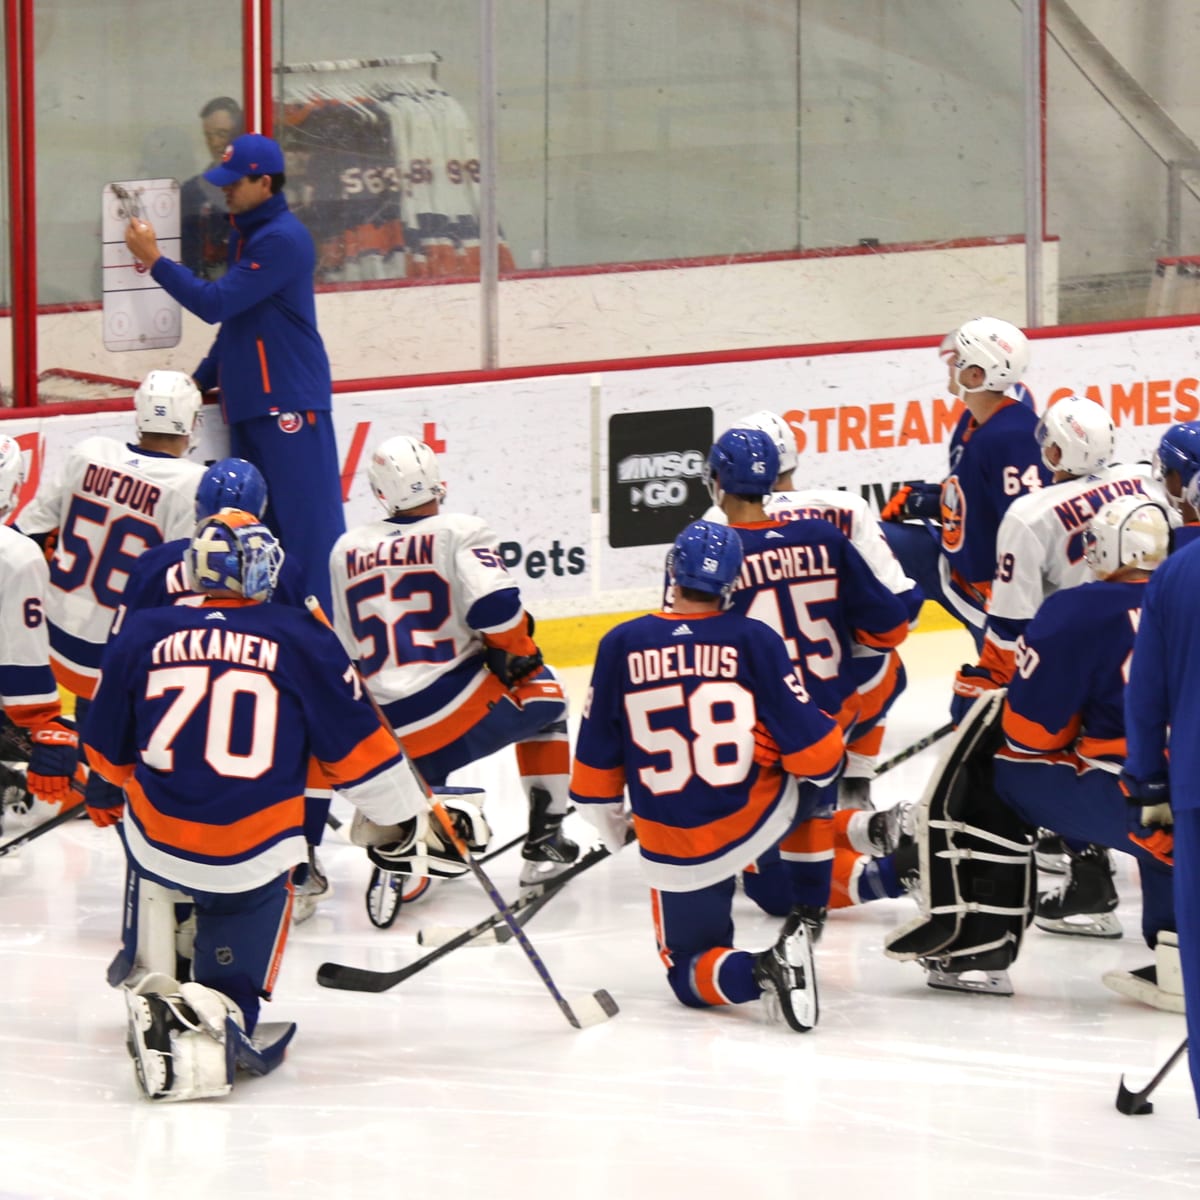 The New York Islanders skate during training camp at Northwell